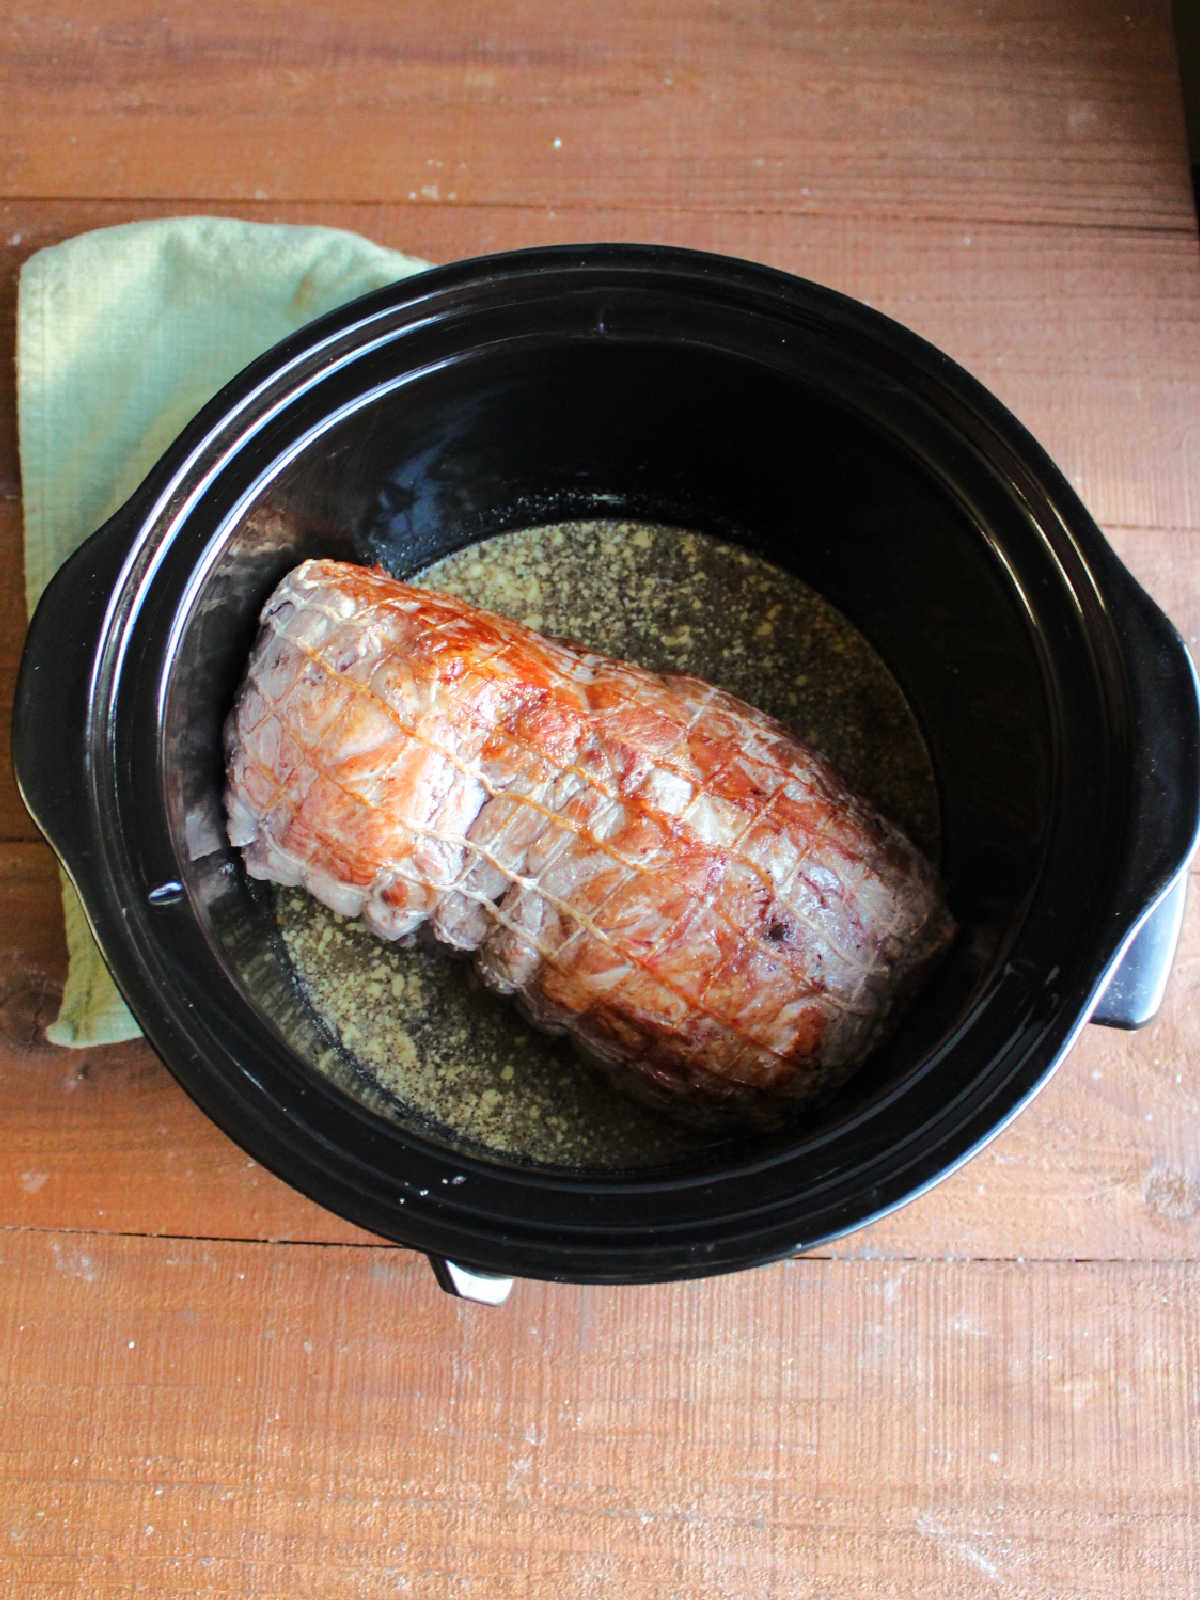 Crockpot with browned pork roast and sauce ingredients, ready to cook.